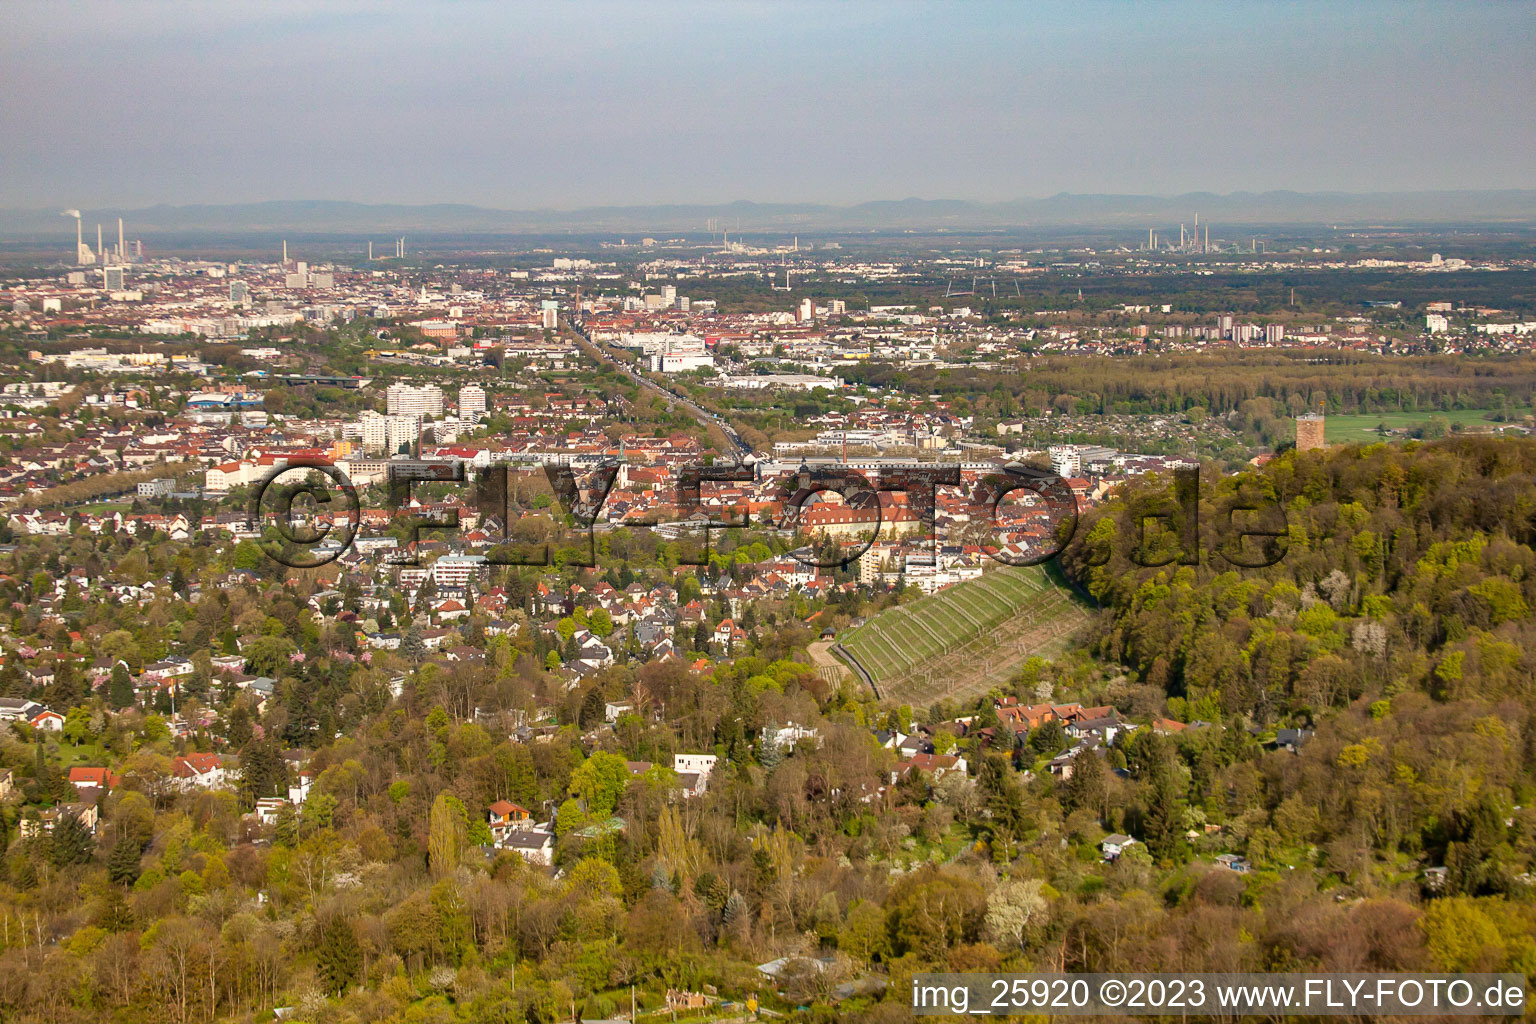 Aerial view of From the east in the district Durlach in Karlsruhe in the state Baden-Wuerttemberg, Germany